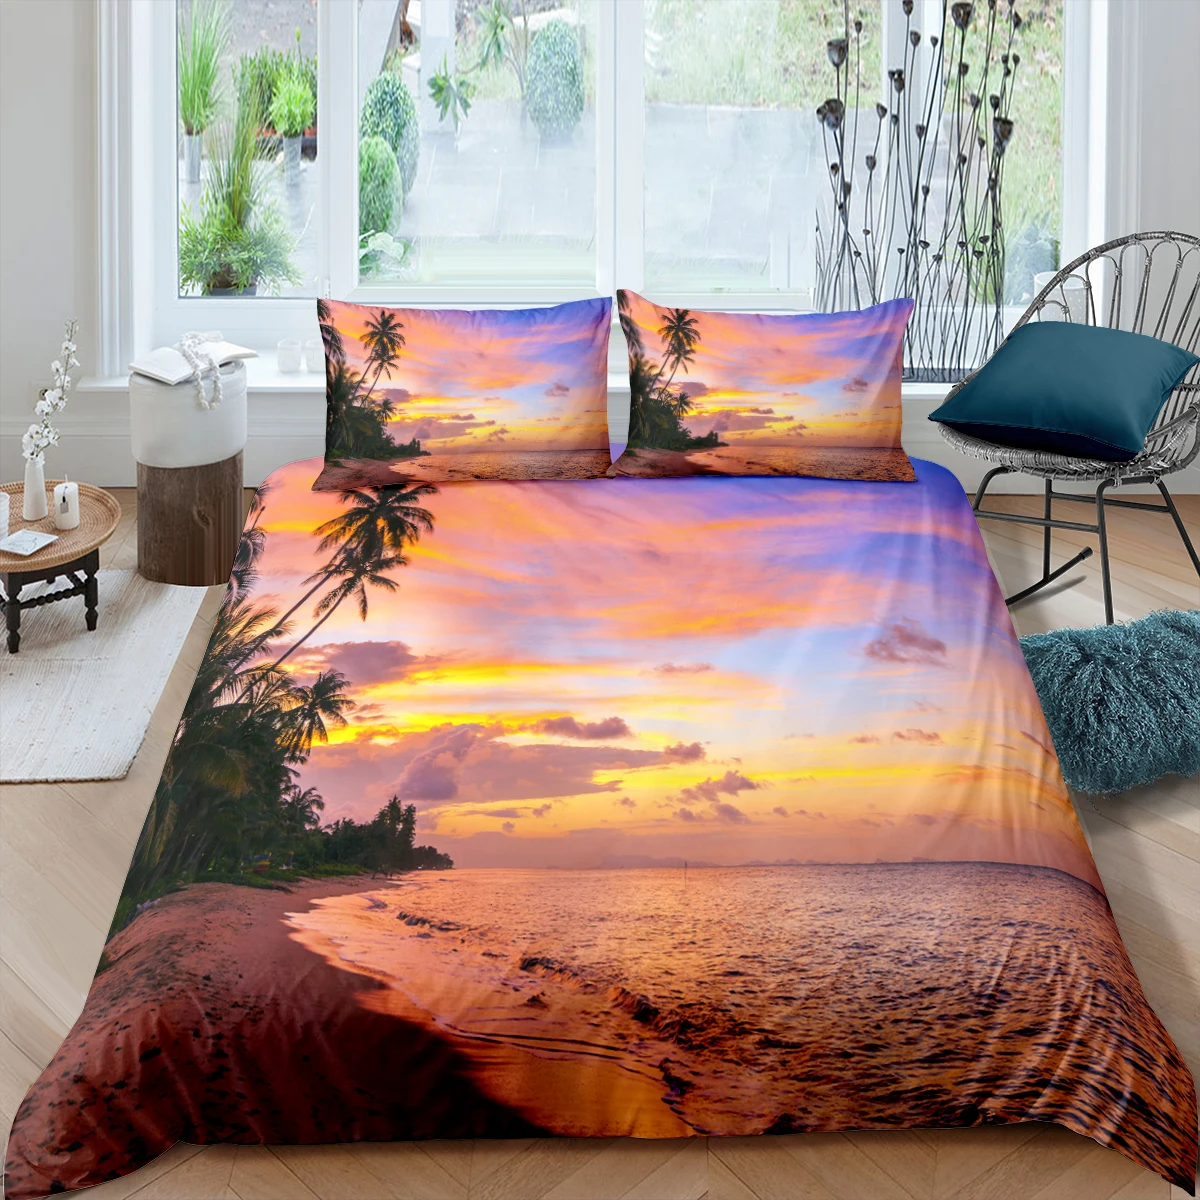 

Ocean Beach King Queen Duvet Cover Seaside Sunset Scenery Bedding Set for Kids Teen Adult Sea Coconut Tree Polyester Quilt Cover